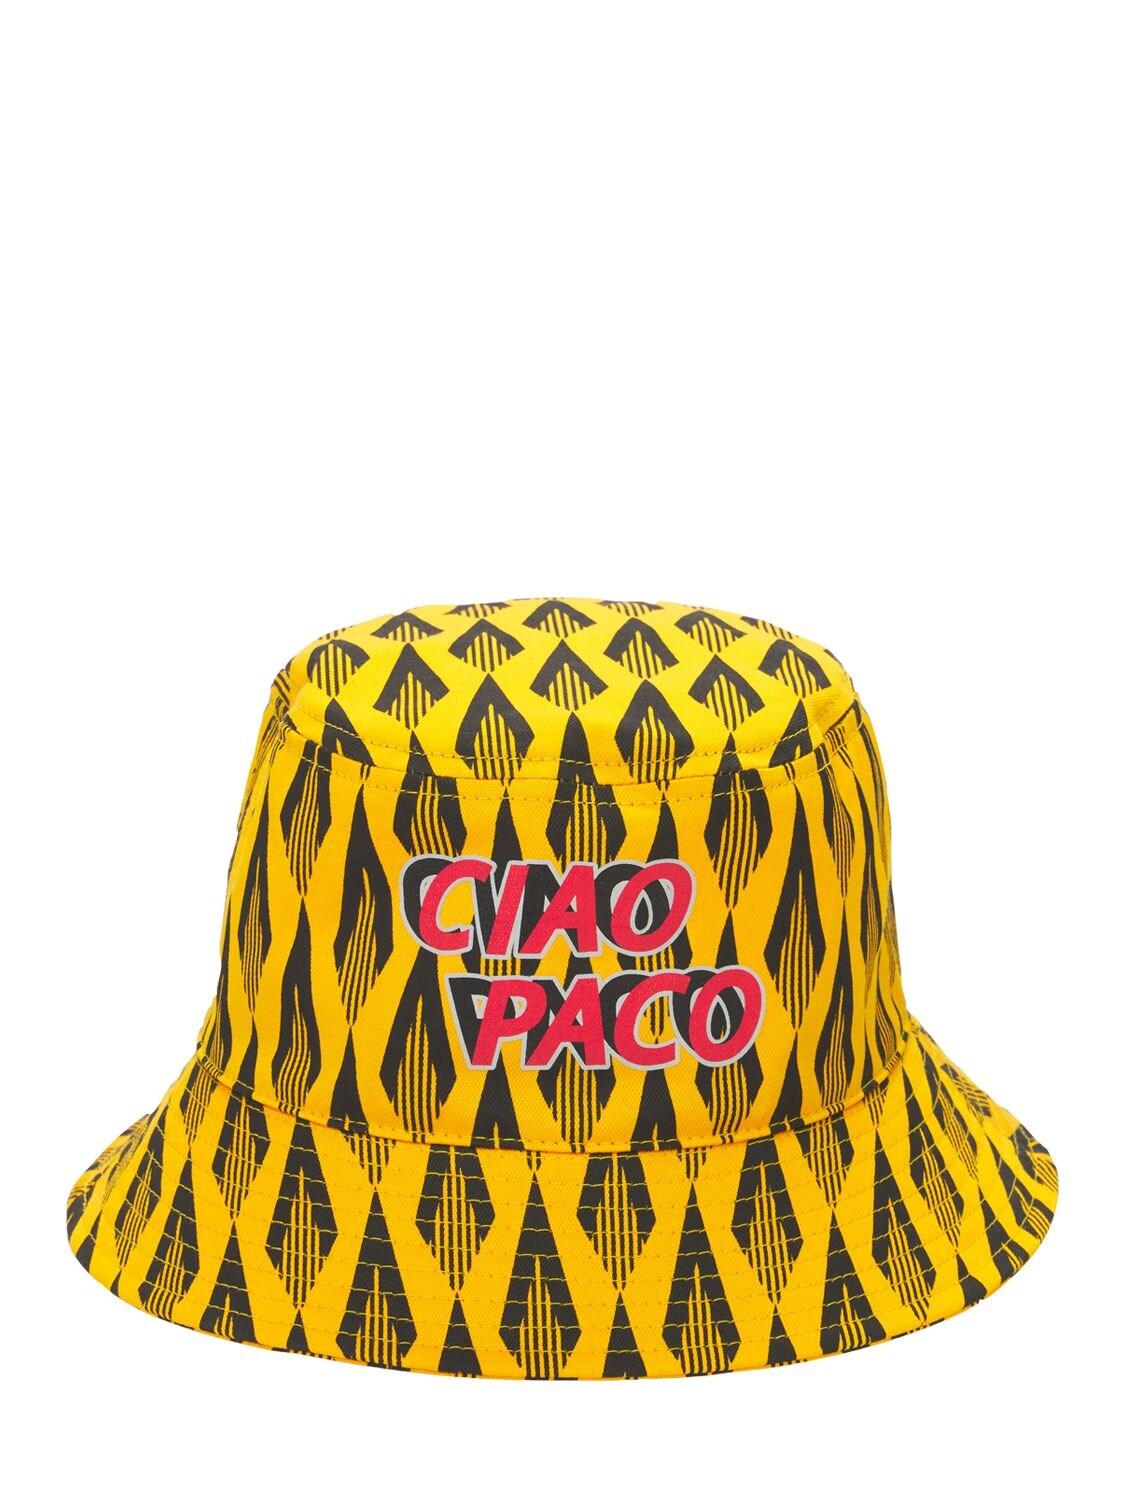 dentist Charming Sailor Paco Rabanne Batik Ciao Paco Print Cotton Bucket Hat in Yellow | Lyst